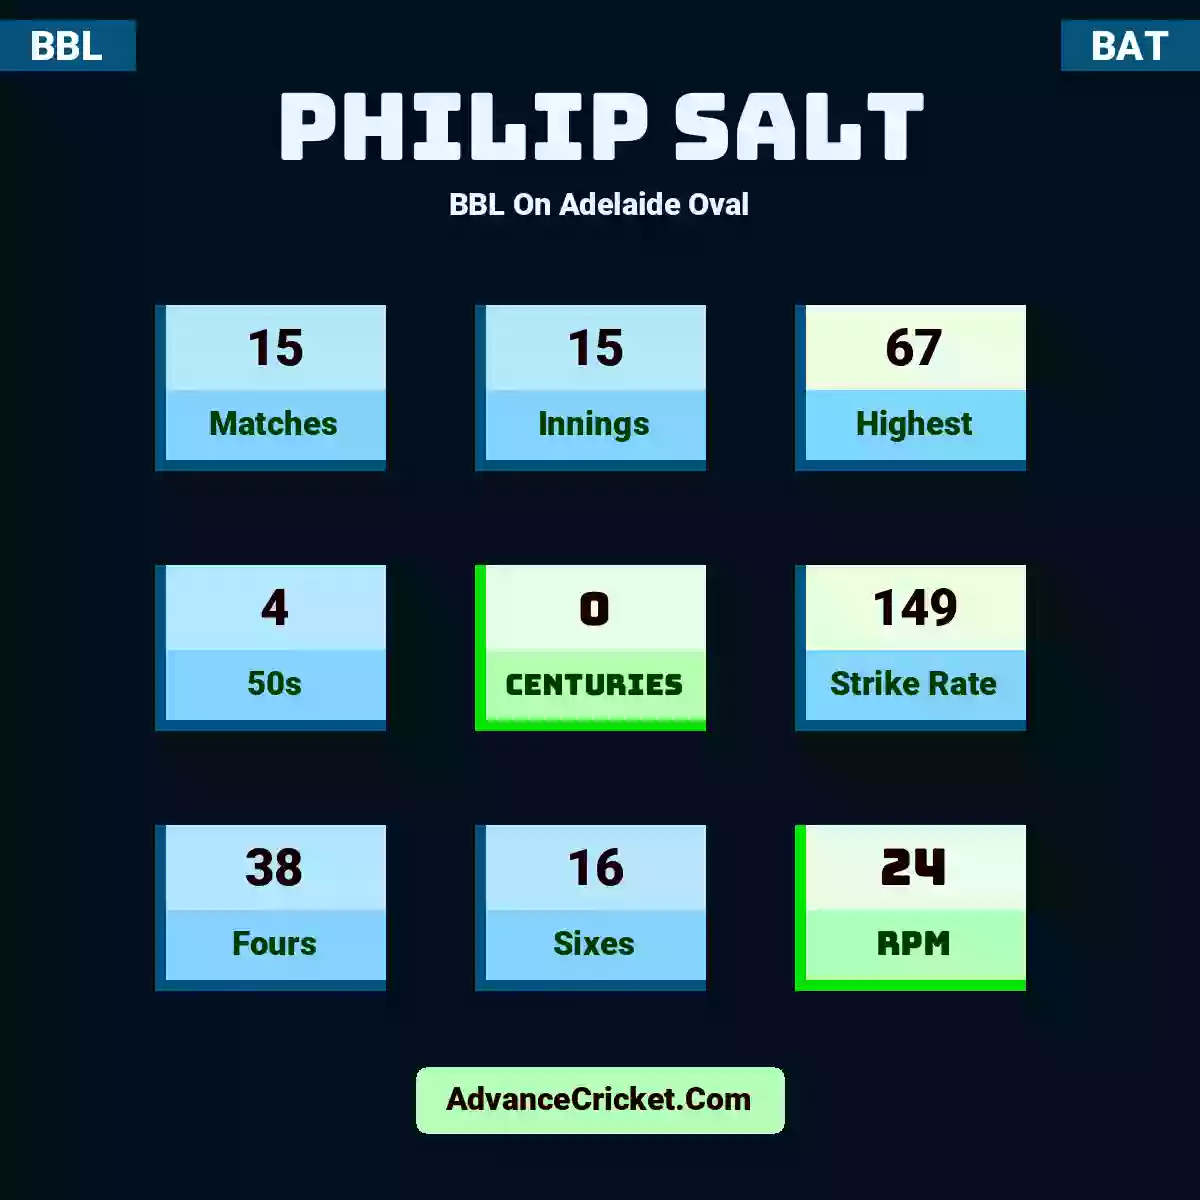 Philip Salt BBL  On Adelaide Oval, Philip Salt played 15 matches, scored 67 runs as highest, 4 half-centuries, and 0 centuries, with a strike rate of 149. P.Salt hit 38 fours and 16 sixes, with an RPM of 24.